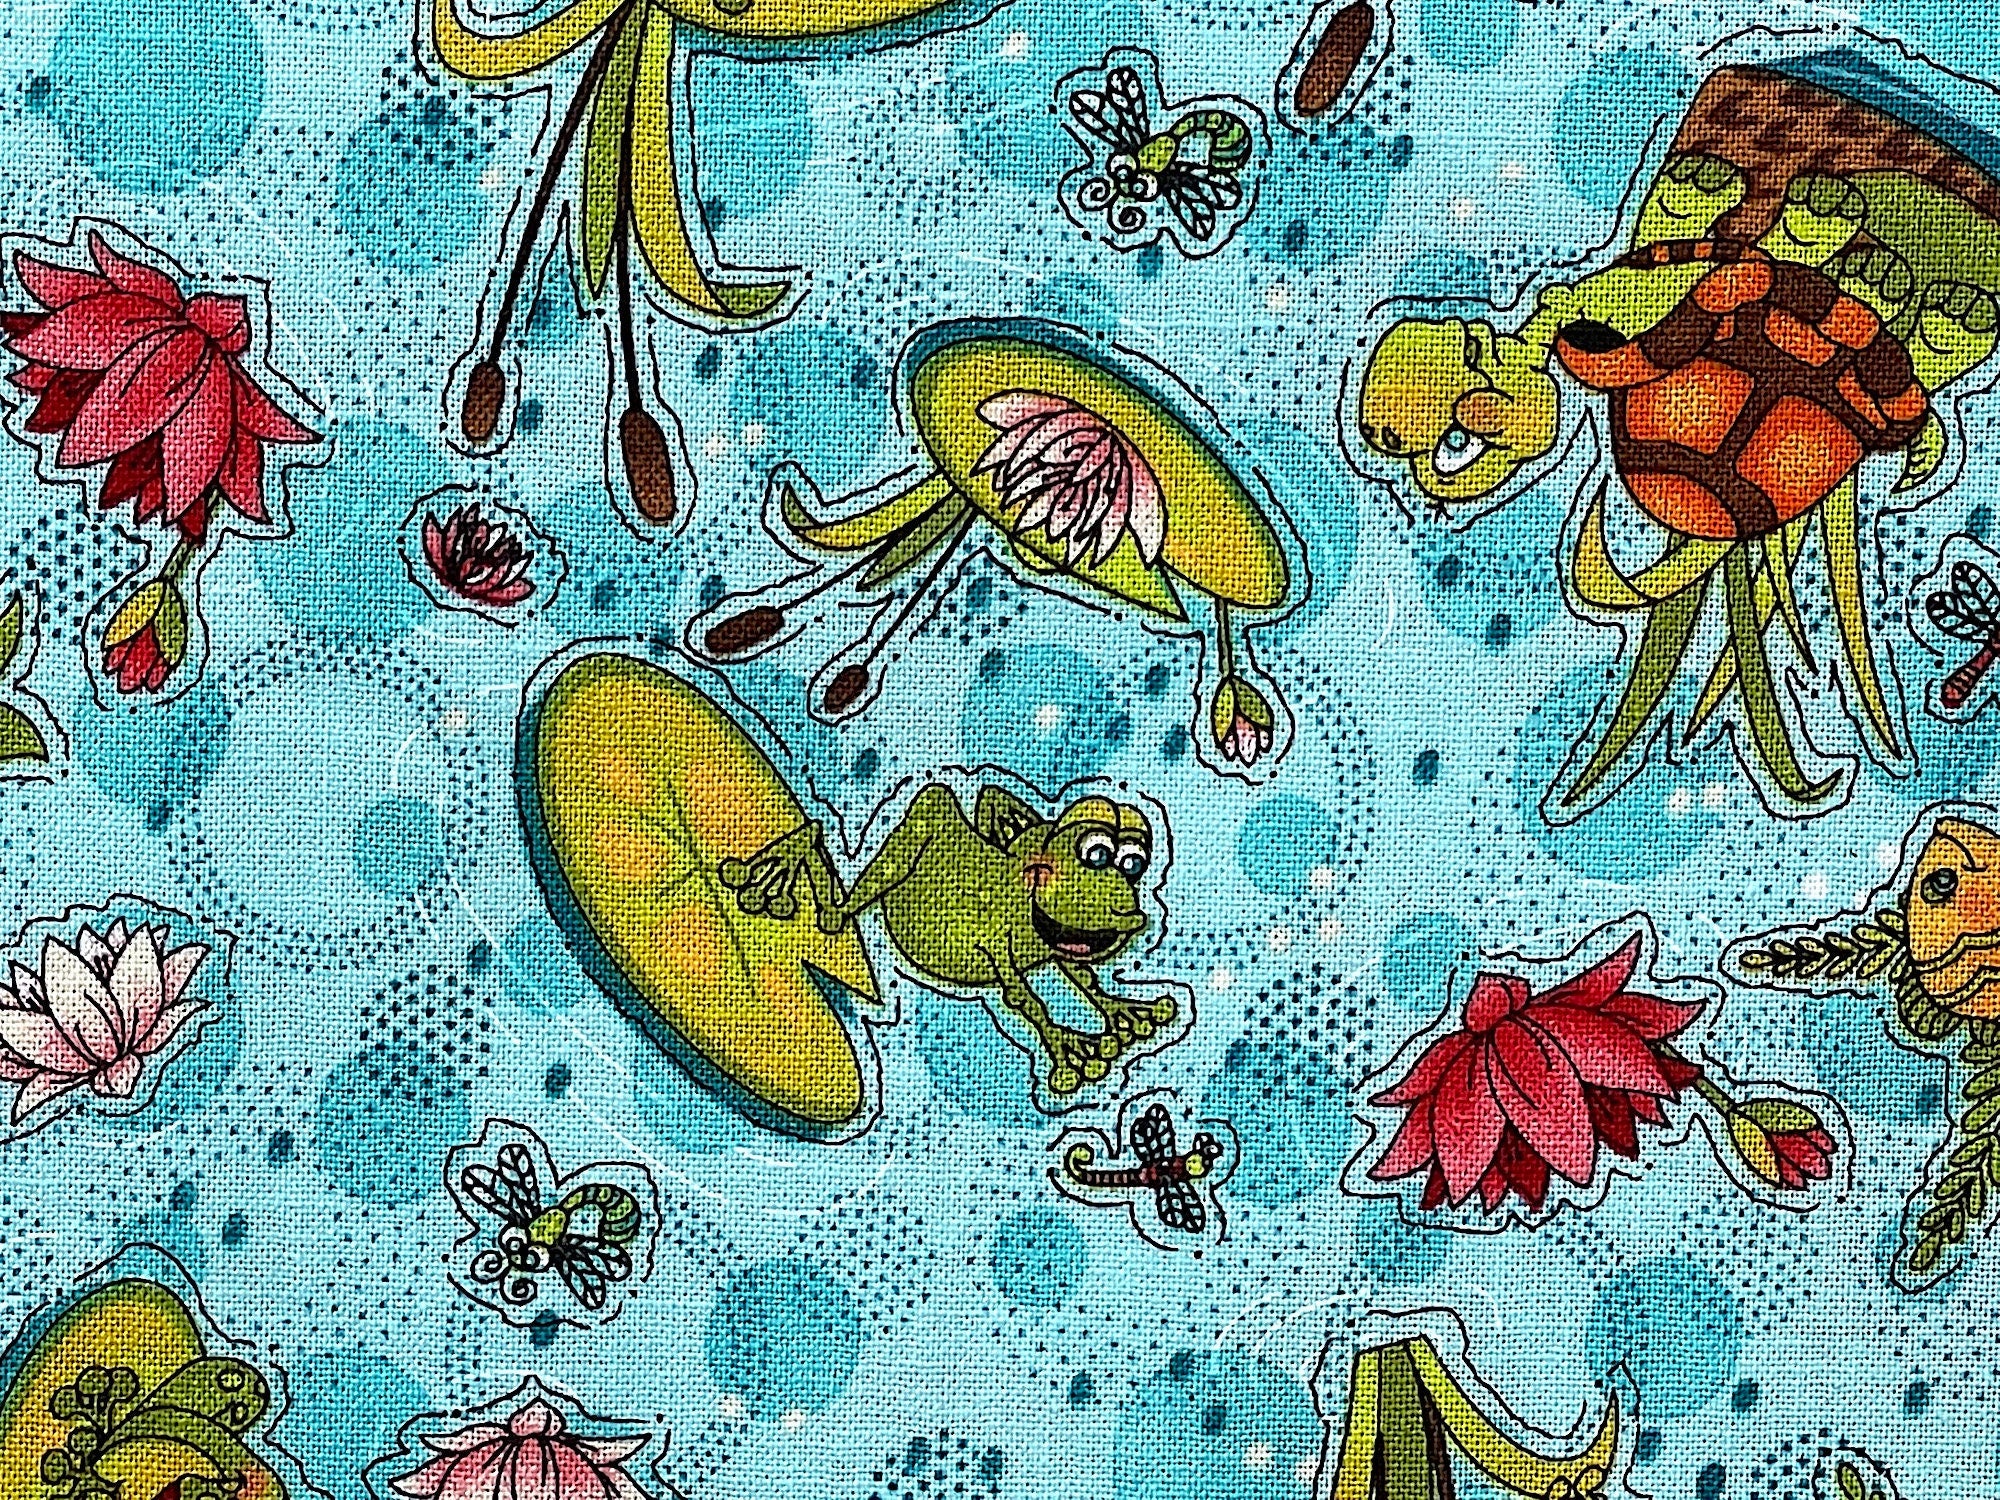 This cotton fabric is called Water Lily and is covered with frogs, fish, grasshoppers, water lilies and more. 